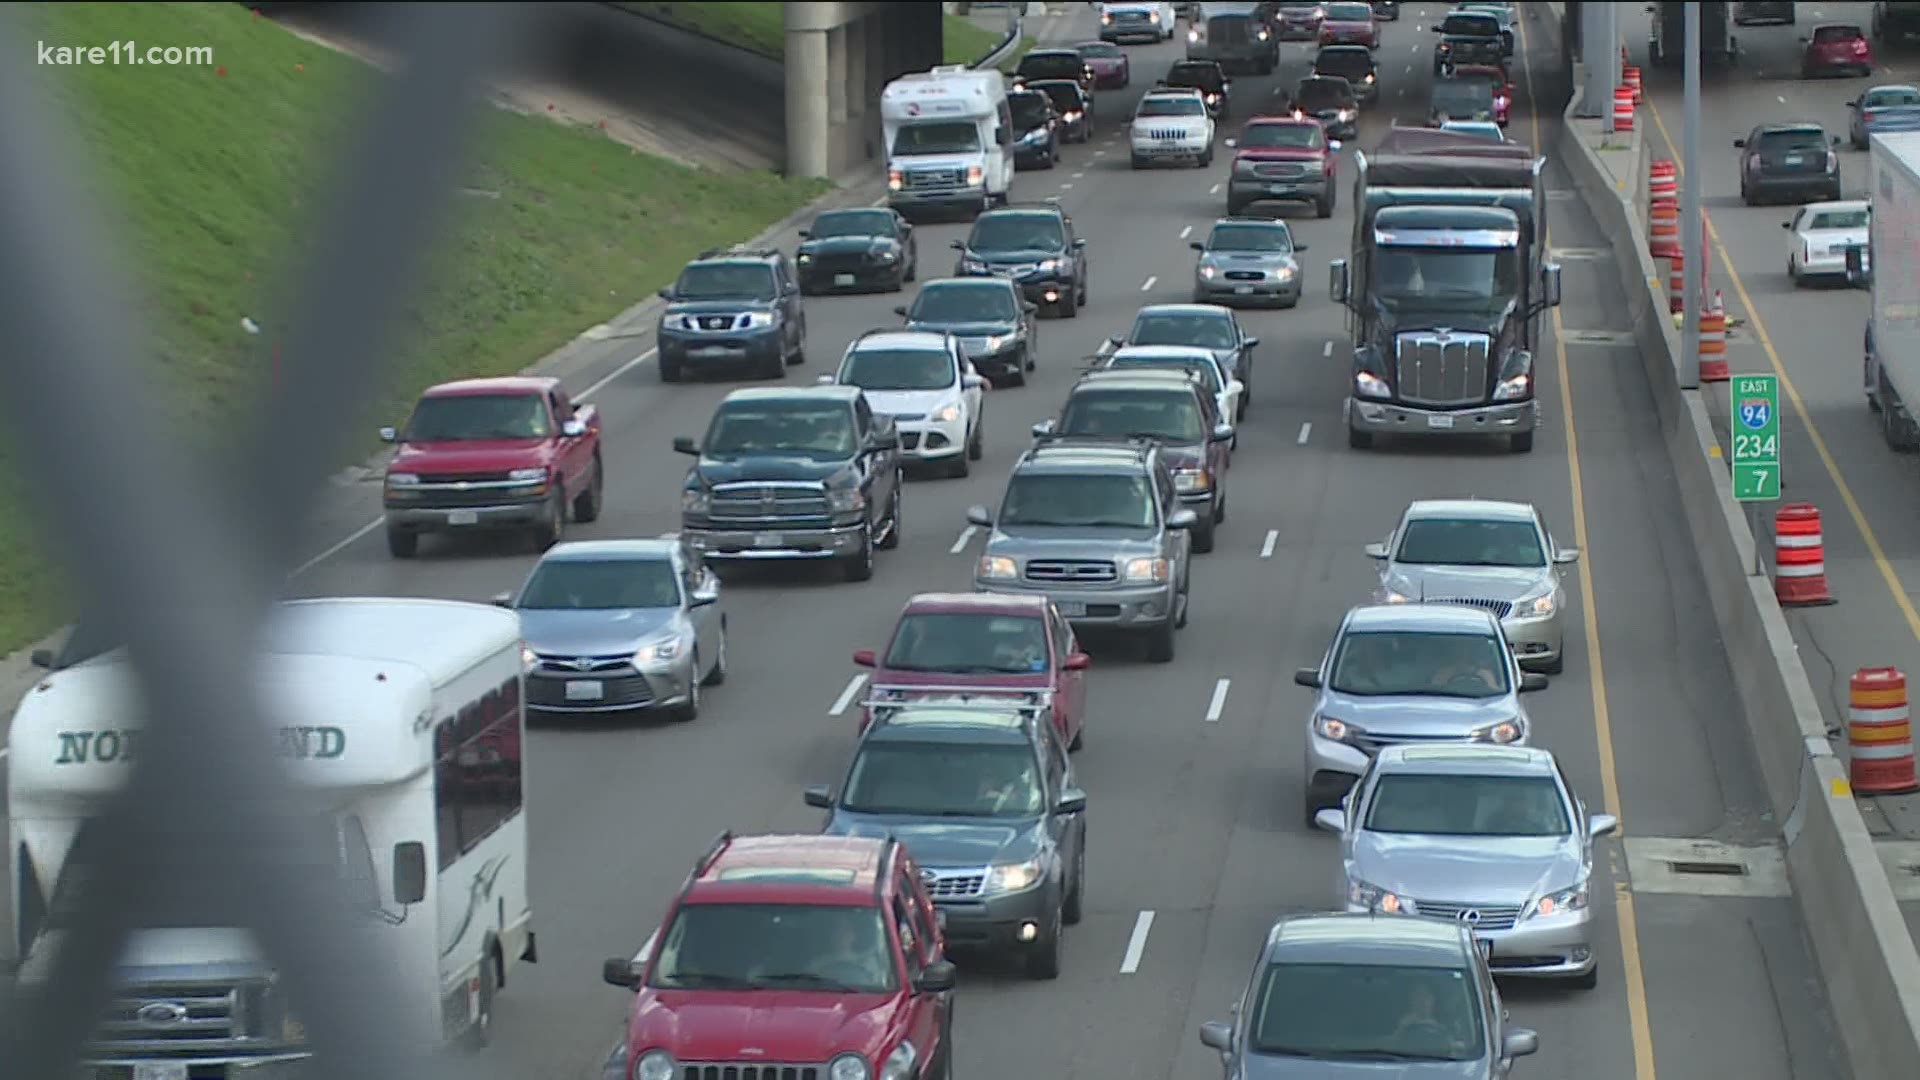 Traffic was down in 2020 for both Memorial Day and the 4th of July, but MnDOT says this year the roads will be busy